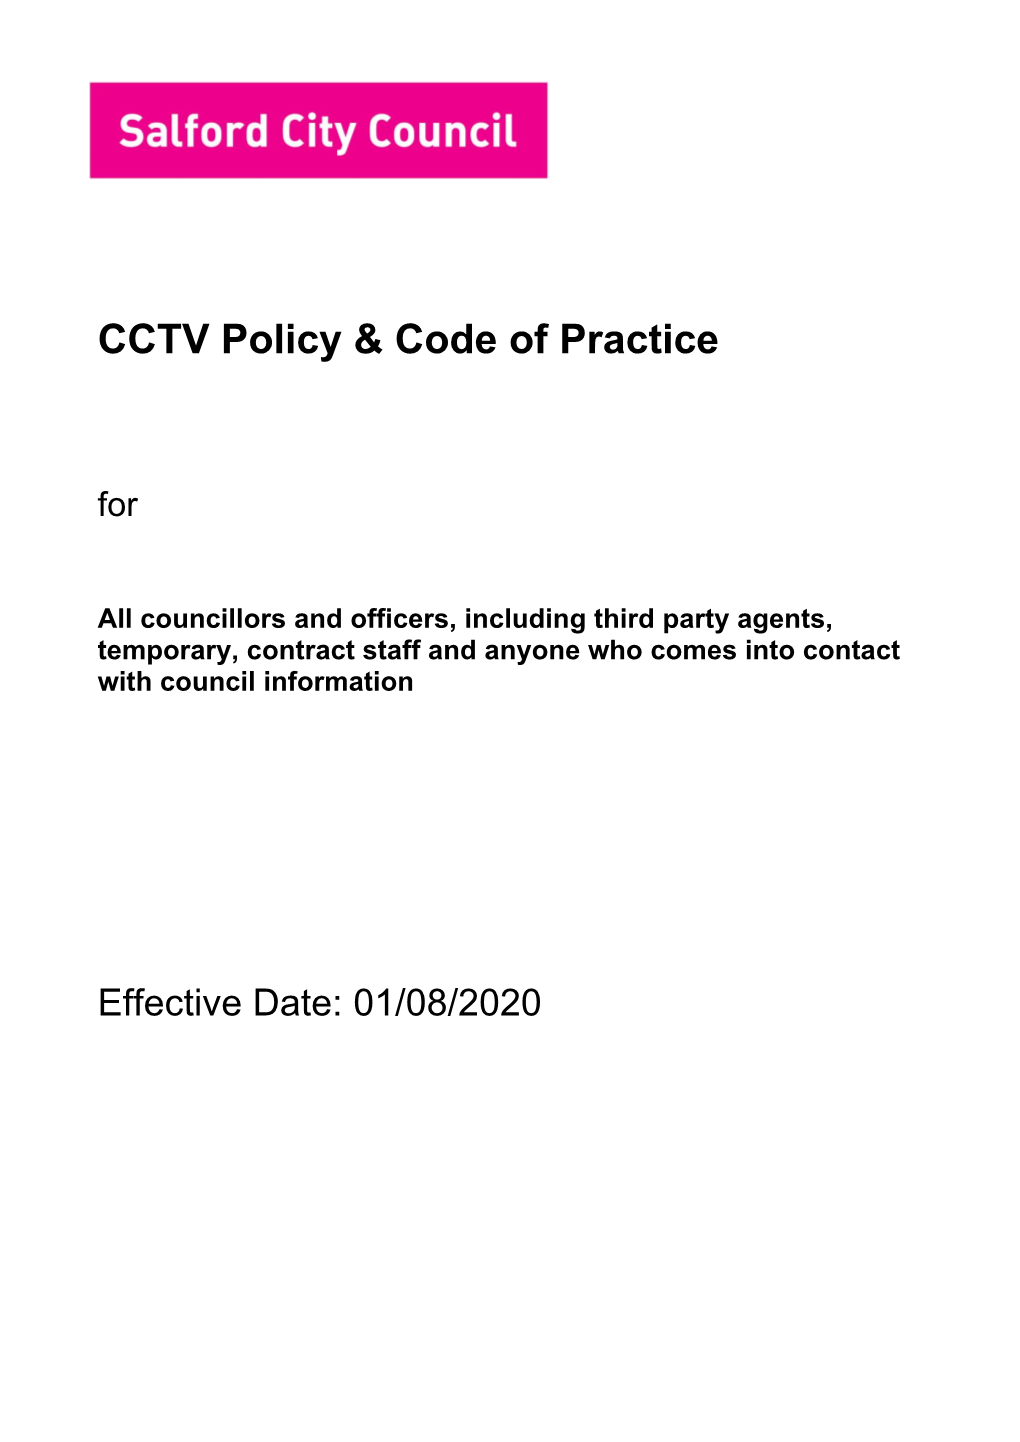 CCTV Policy & Code of Practice